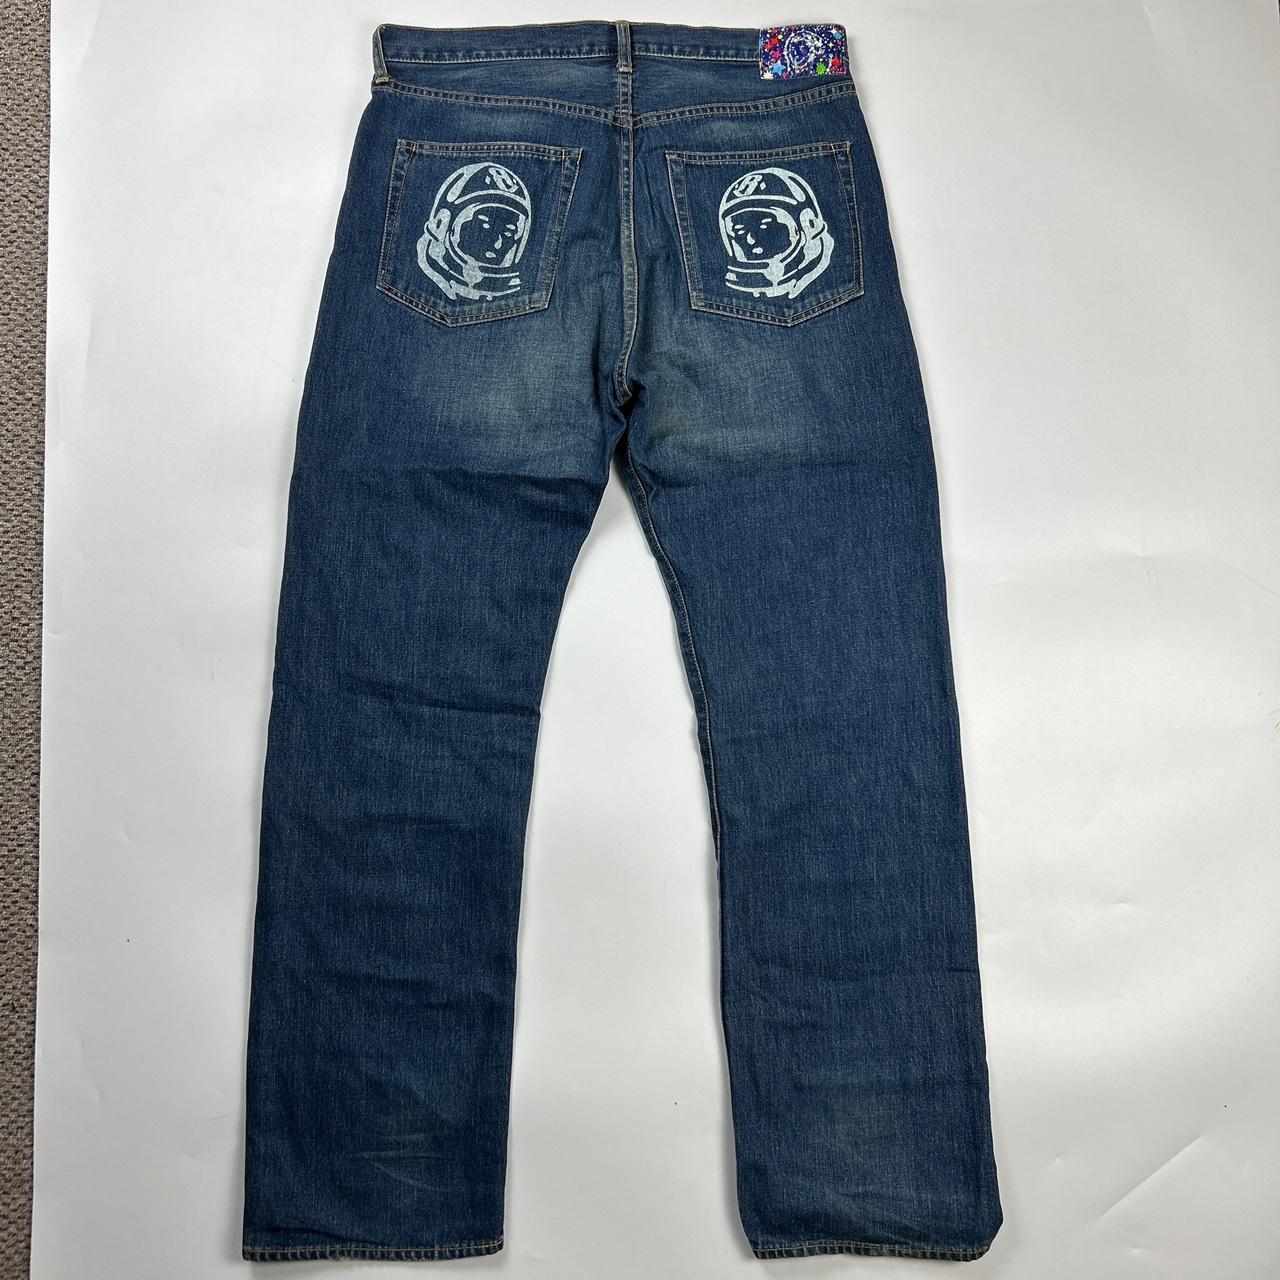 Running Pup Jeans (34")